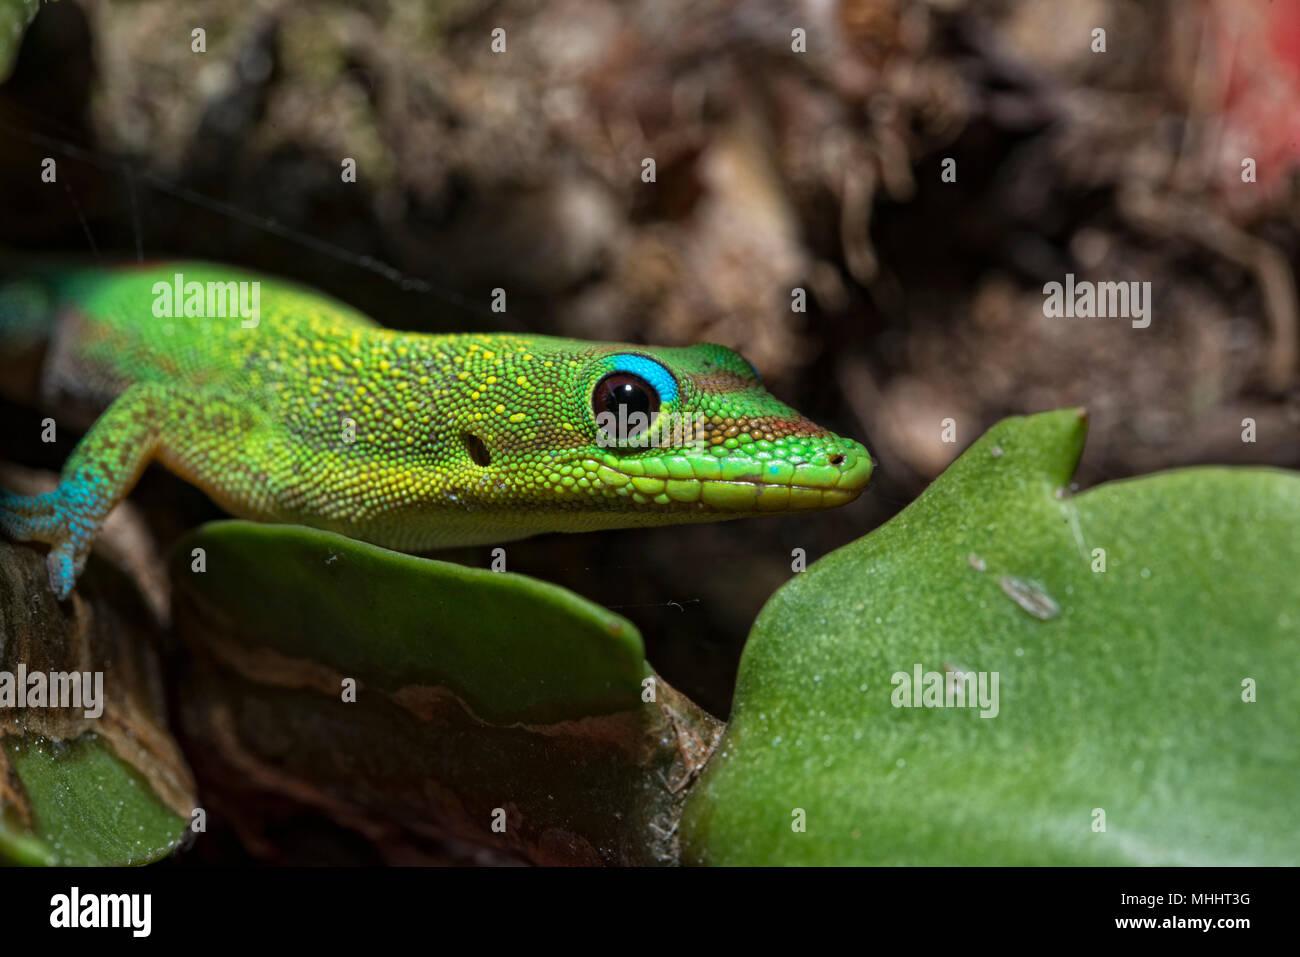 green red and blue Gold dust day gecko from hawaii while eating jam Stock Photo